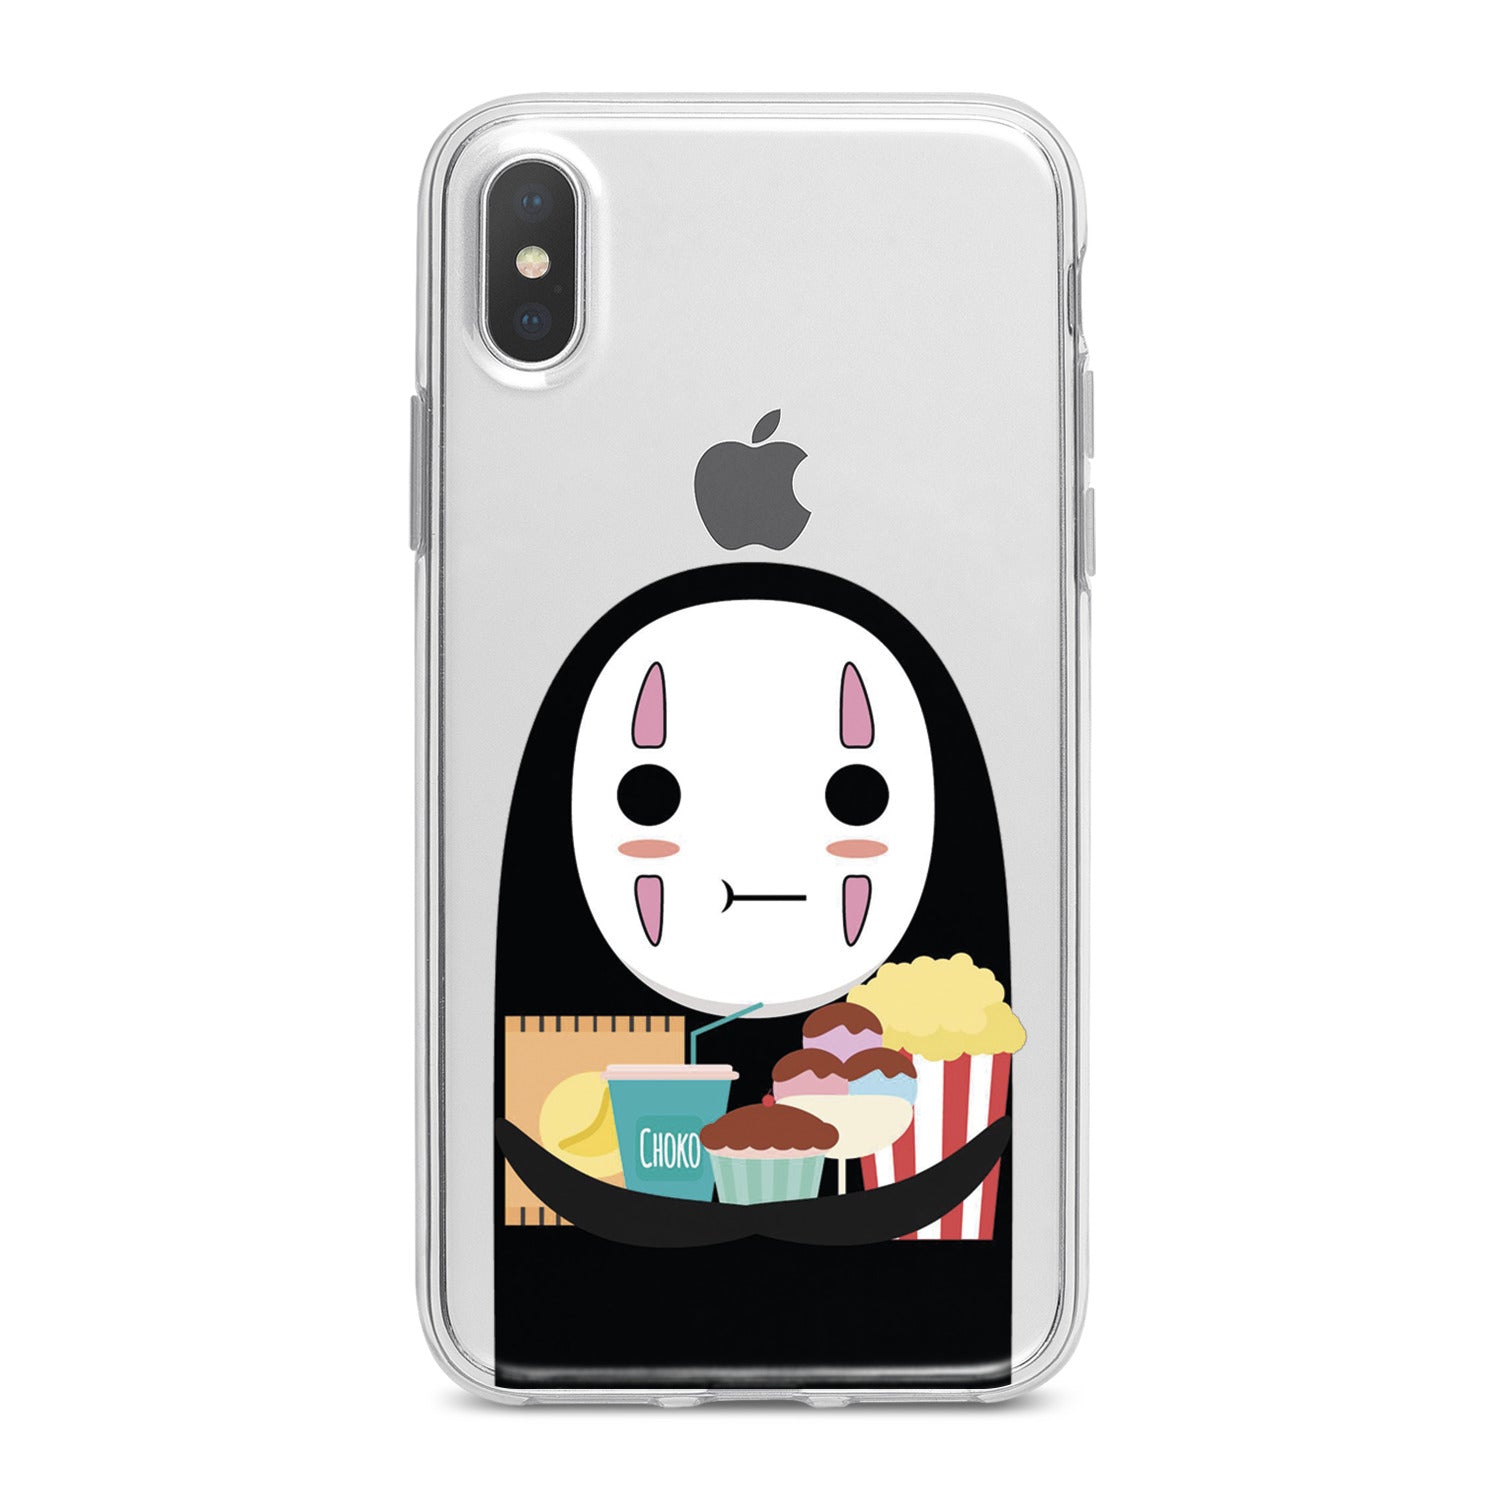 Lex Altern No Face Print Phone Case for your iPhone & Android phone.